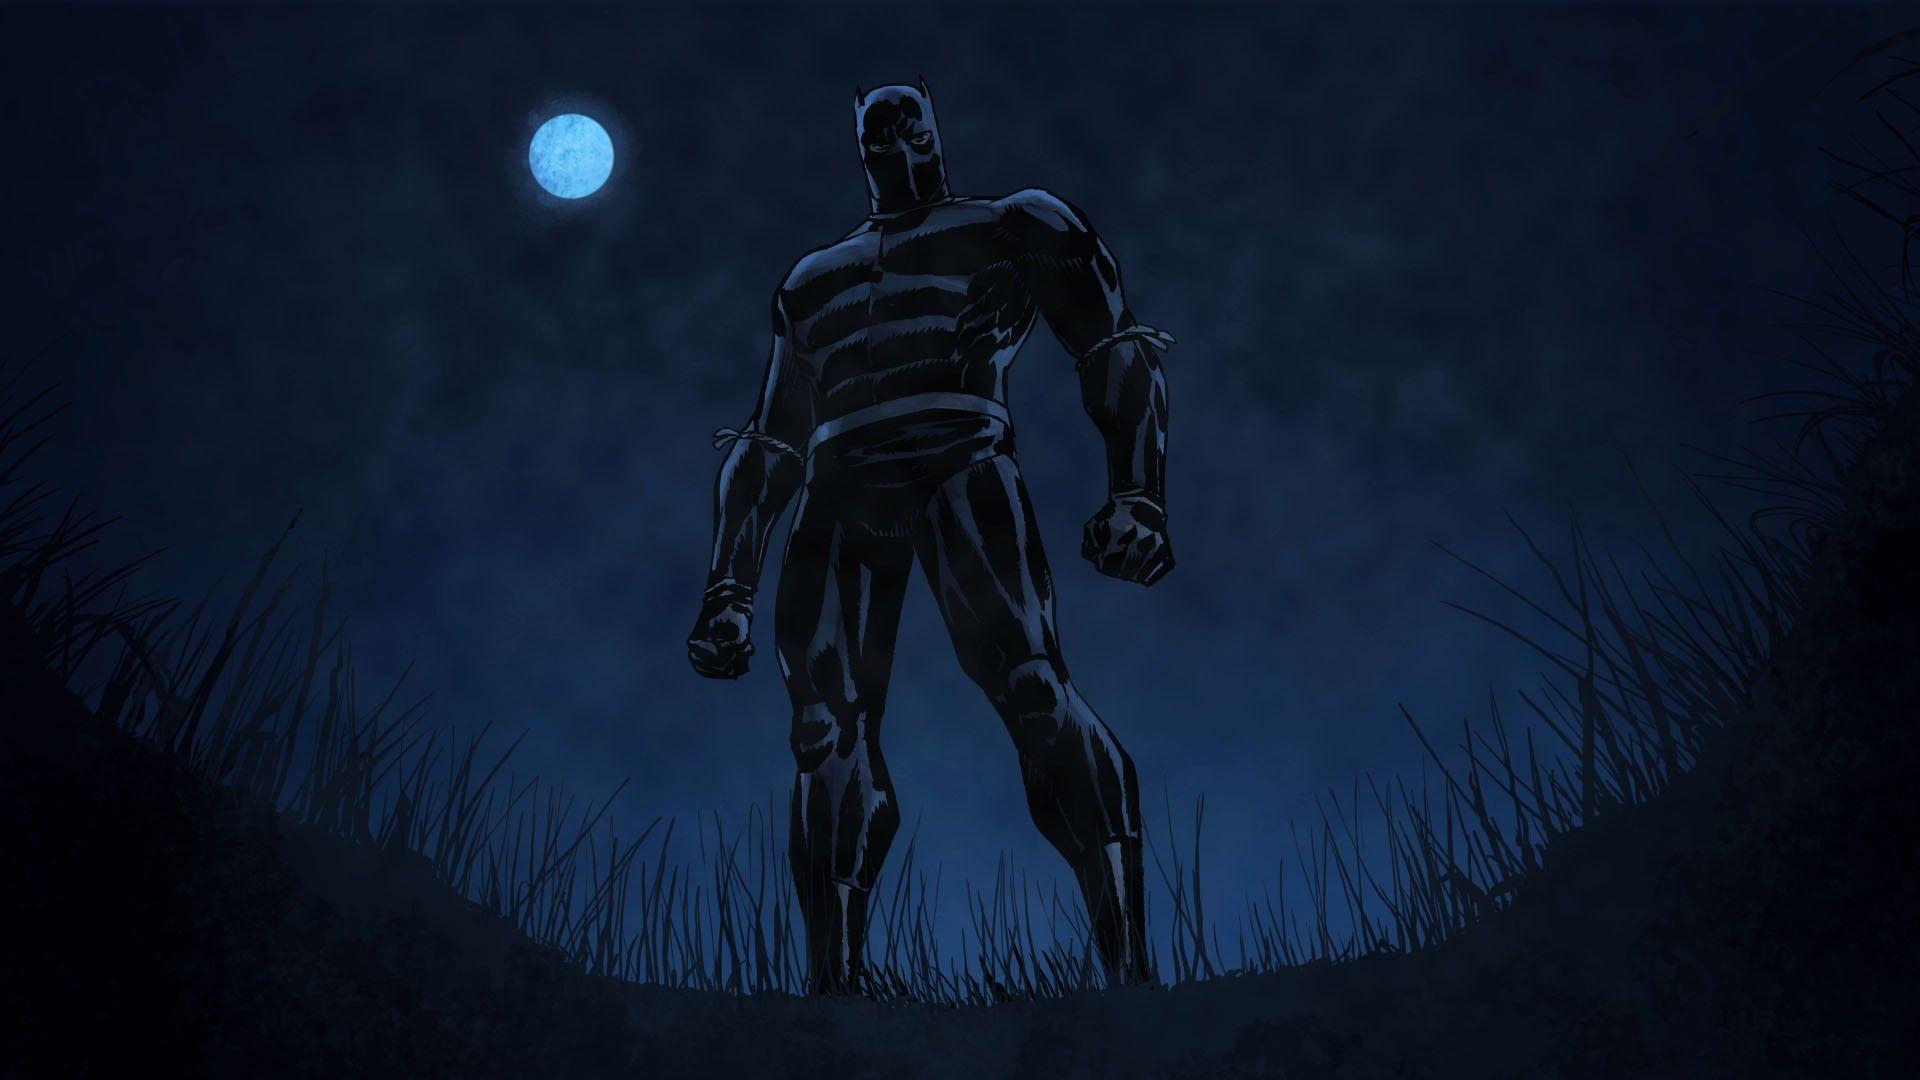 Marvel Cinematic Universe, Black Panther, Concept Art, Night, Moon